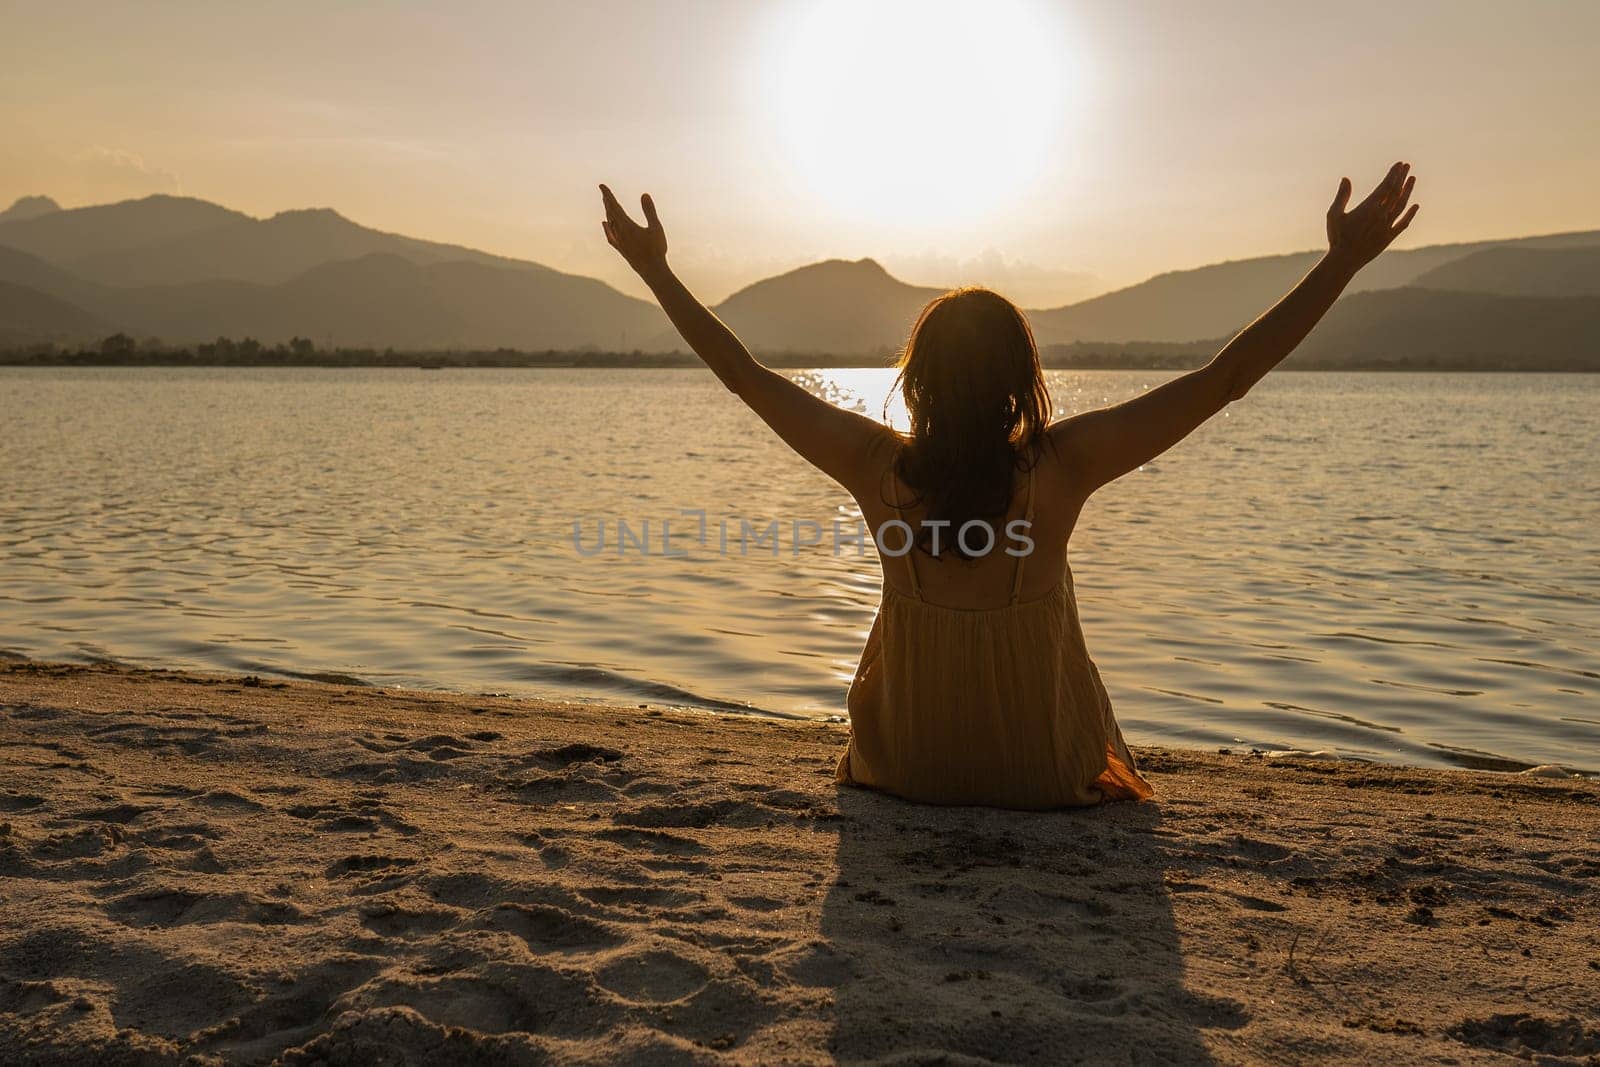 Evocative shot: woman in contemplative pose sitting on the sand with arms wide, facing the sea at sunrise or sunset on a beach. Connect with nature.